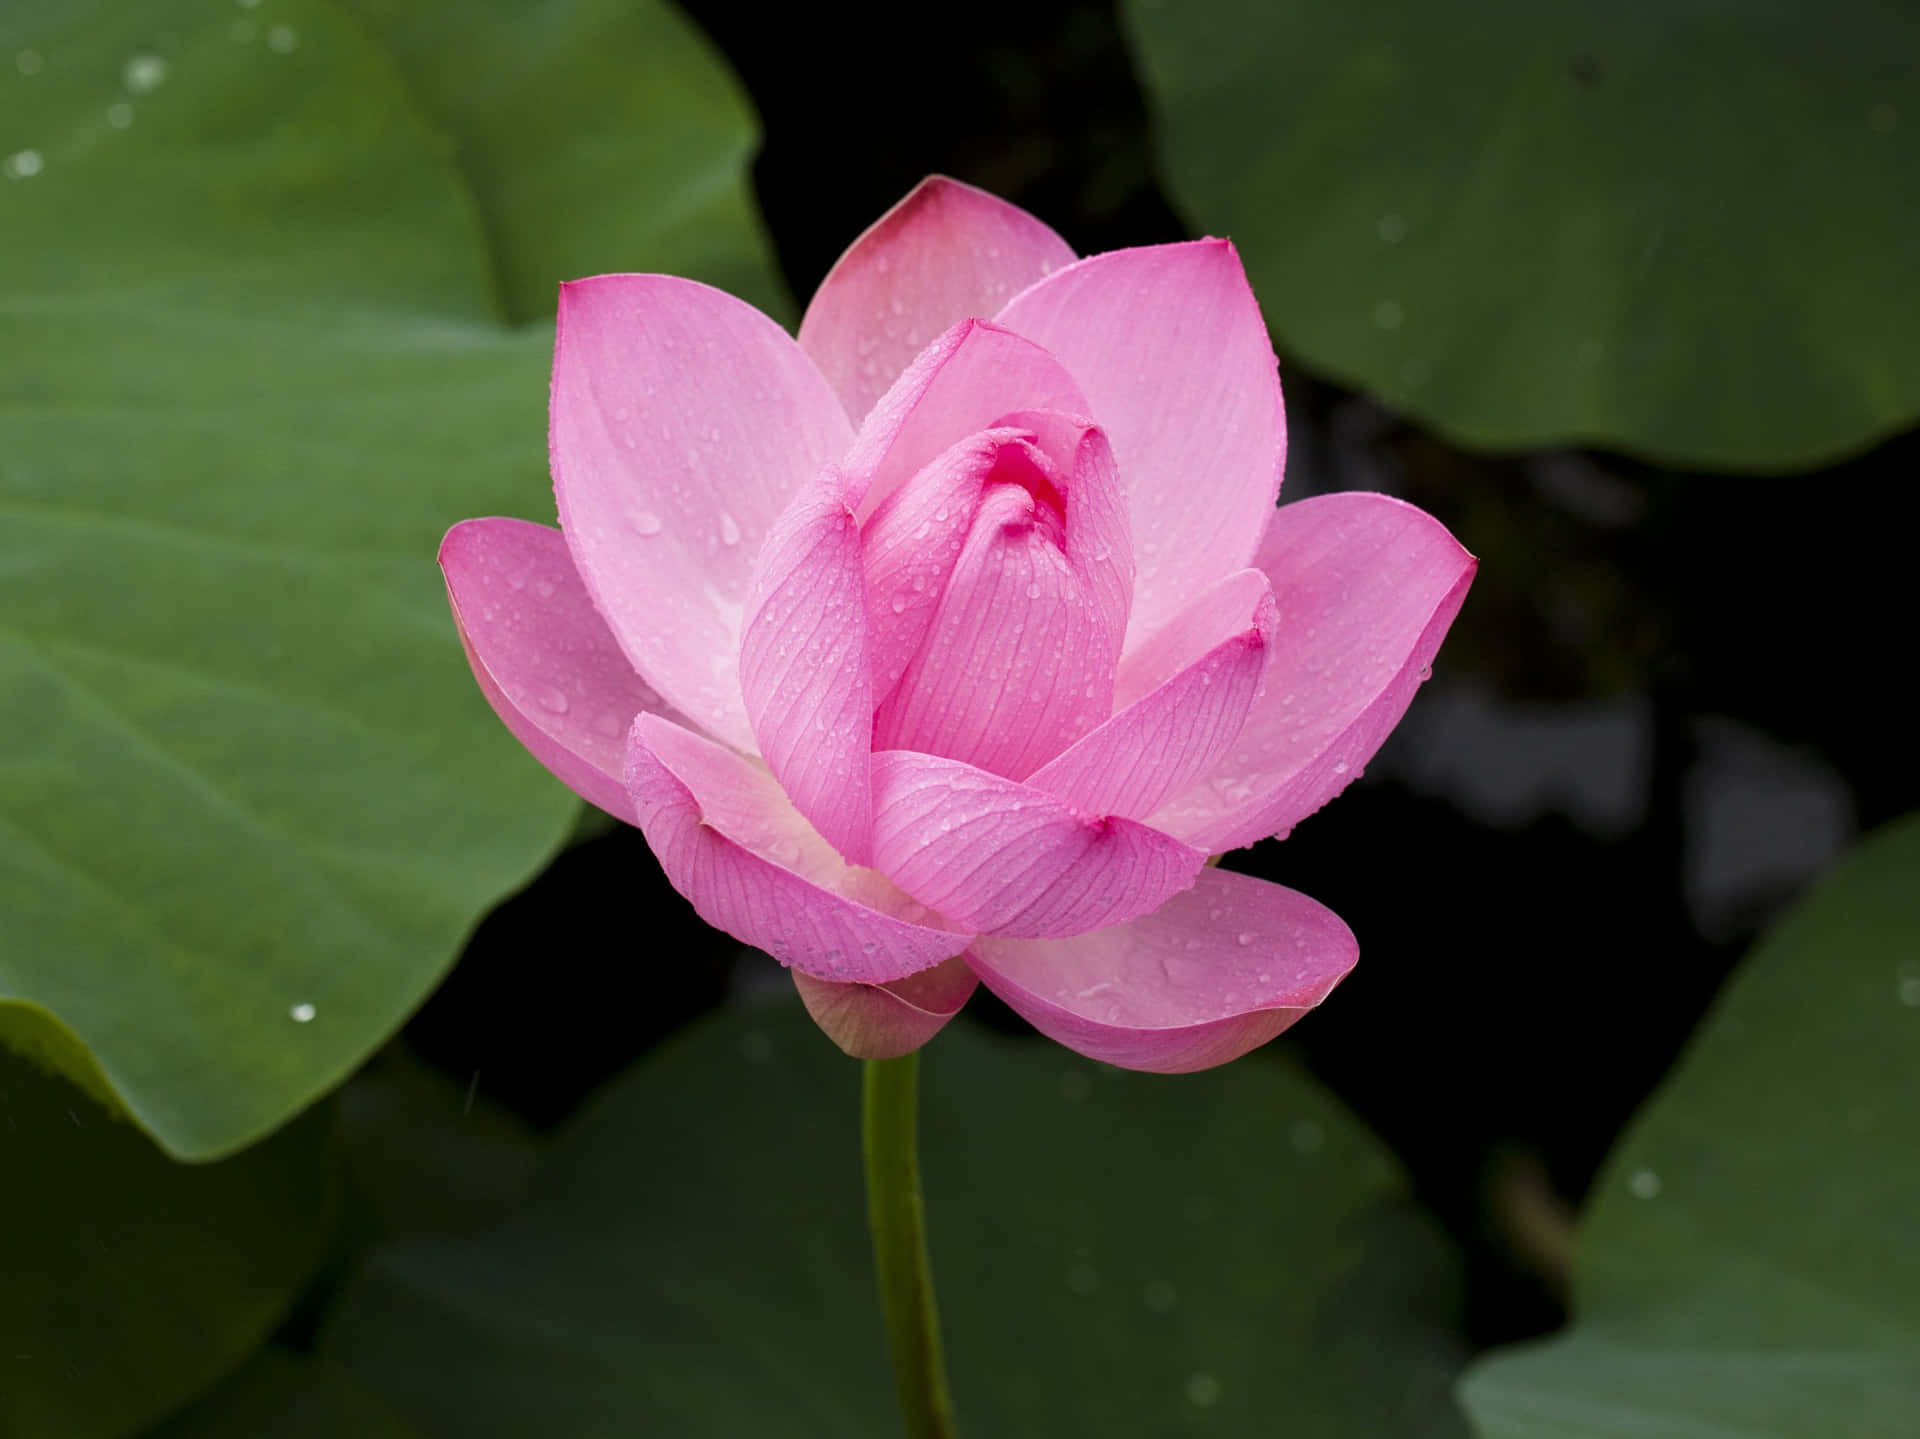 The Lotus flower, true symbolism of beauty, enlightenment and fragility.